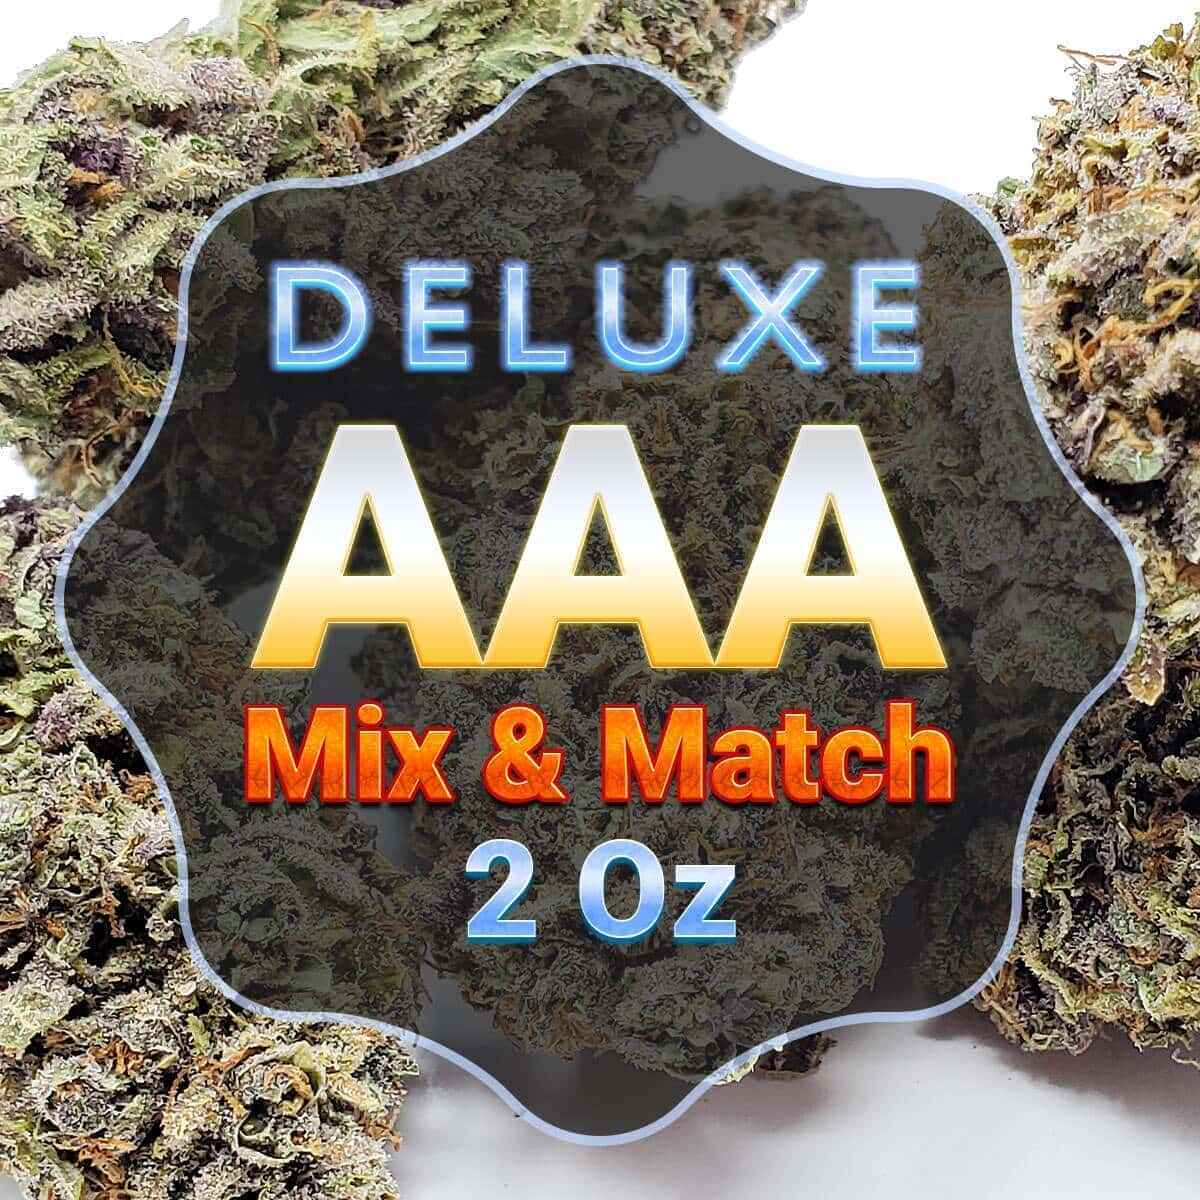 Choosing the right strains for you 12